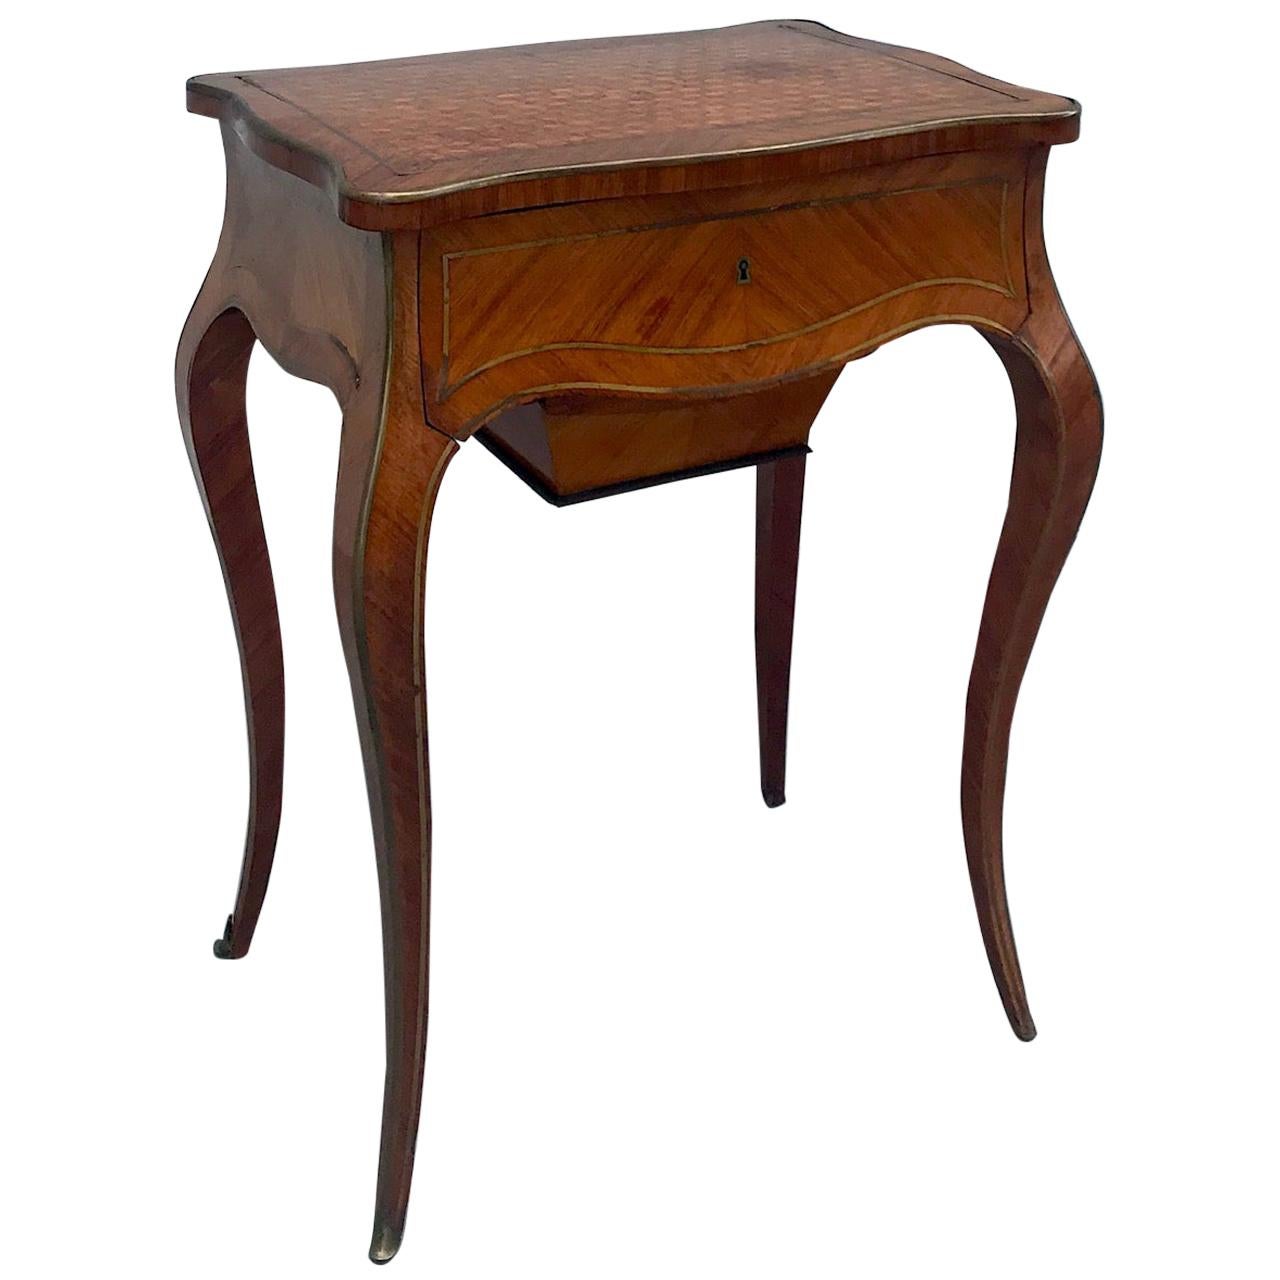 19th Century Louis XV Style Tulipwood Parquetry Sewing Table